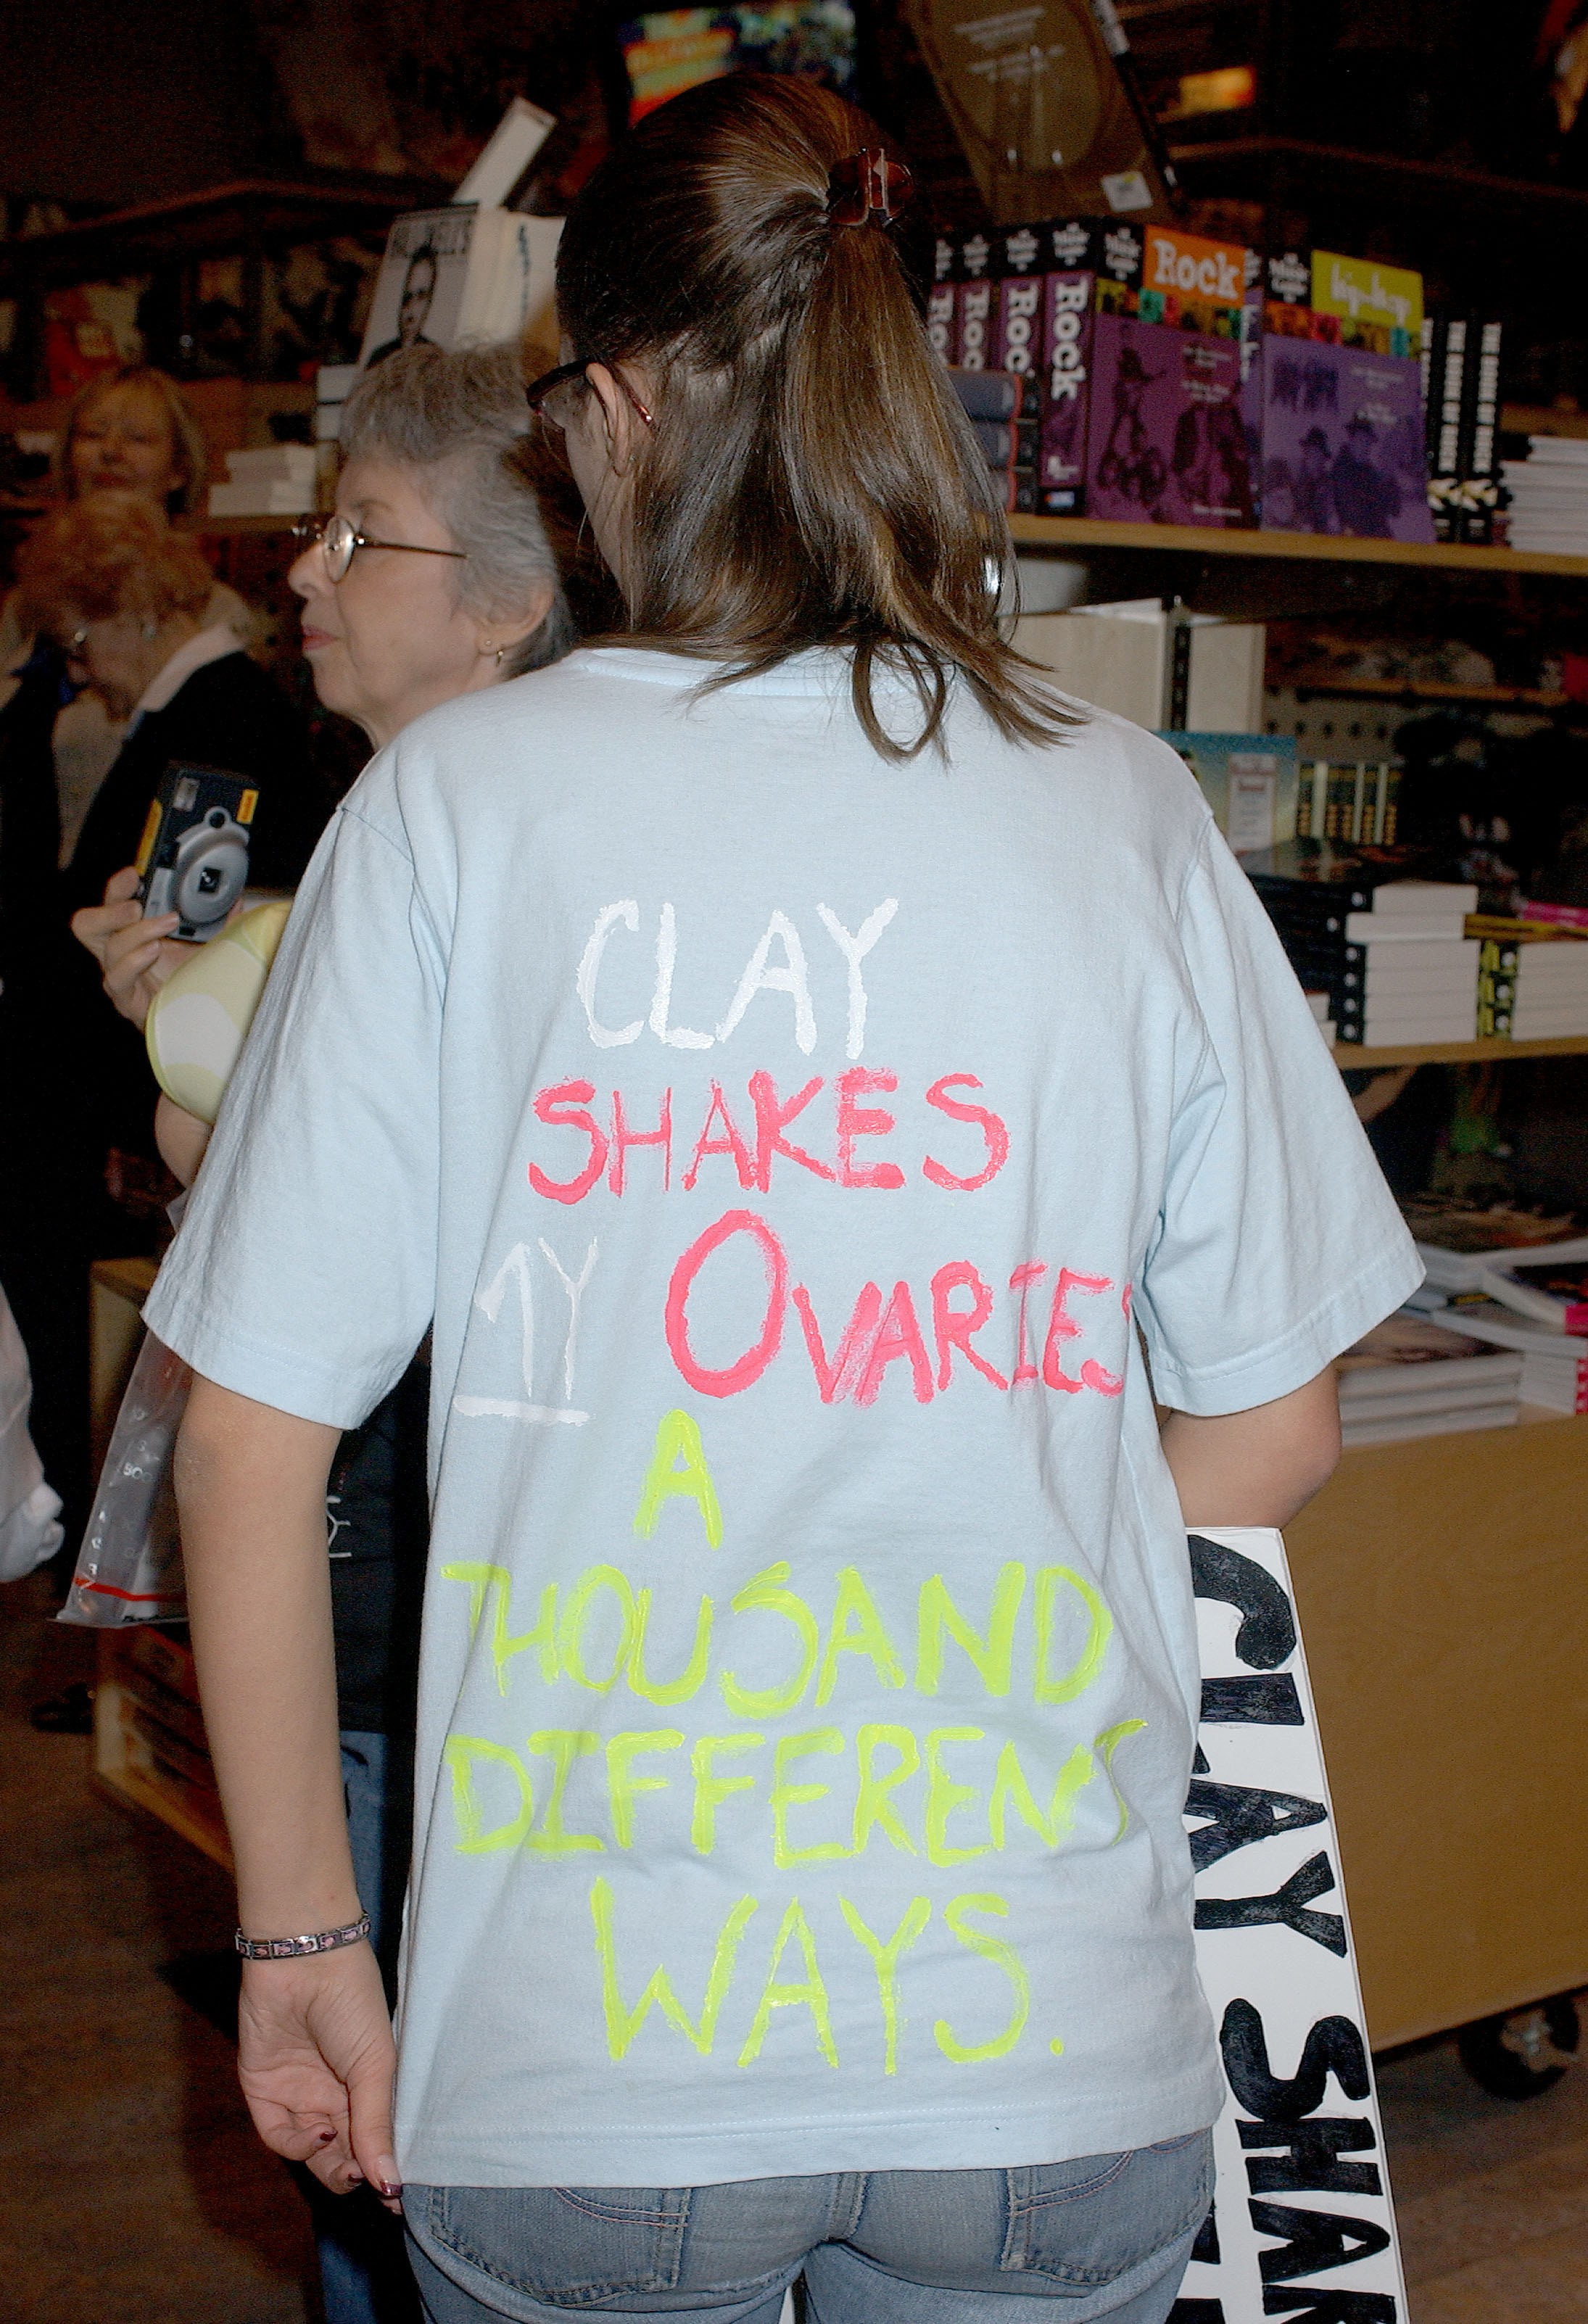 The back of a T-shirt that reads &quot; Clay shakes my ovaries a thousand different ways&quot;